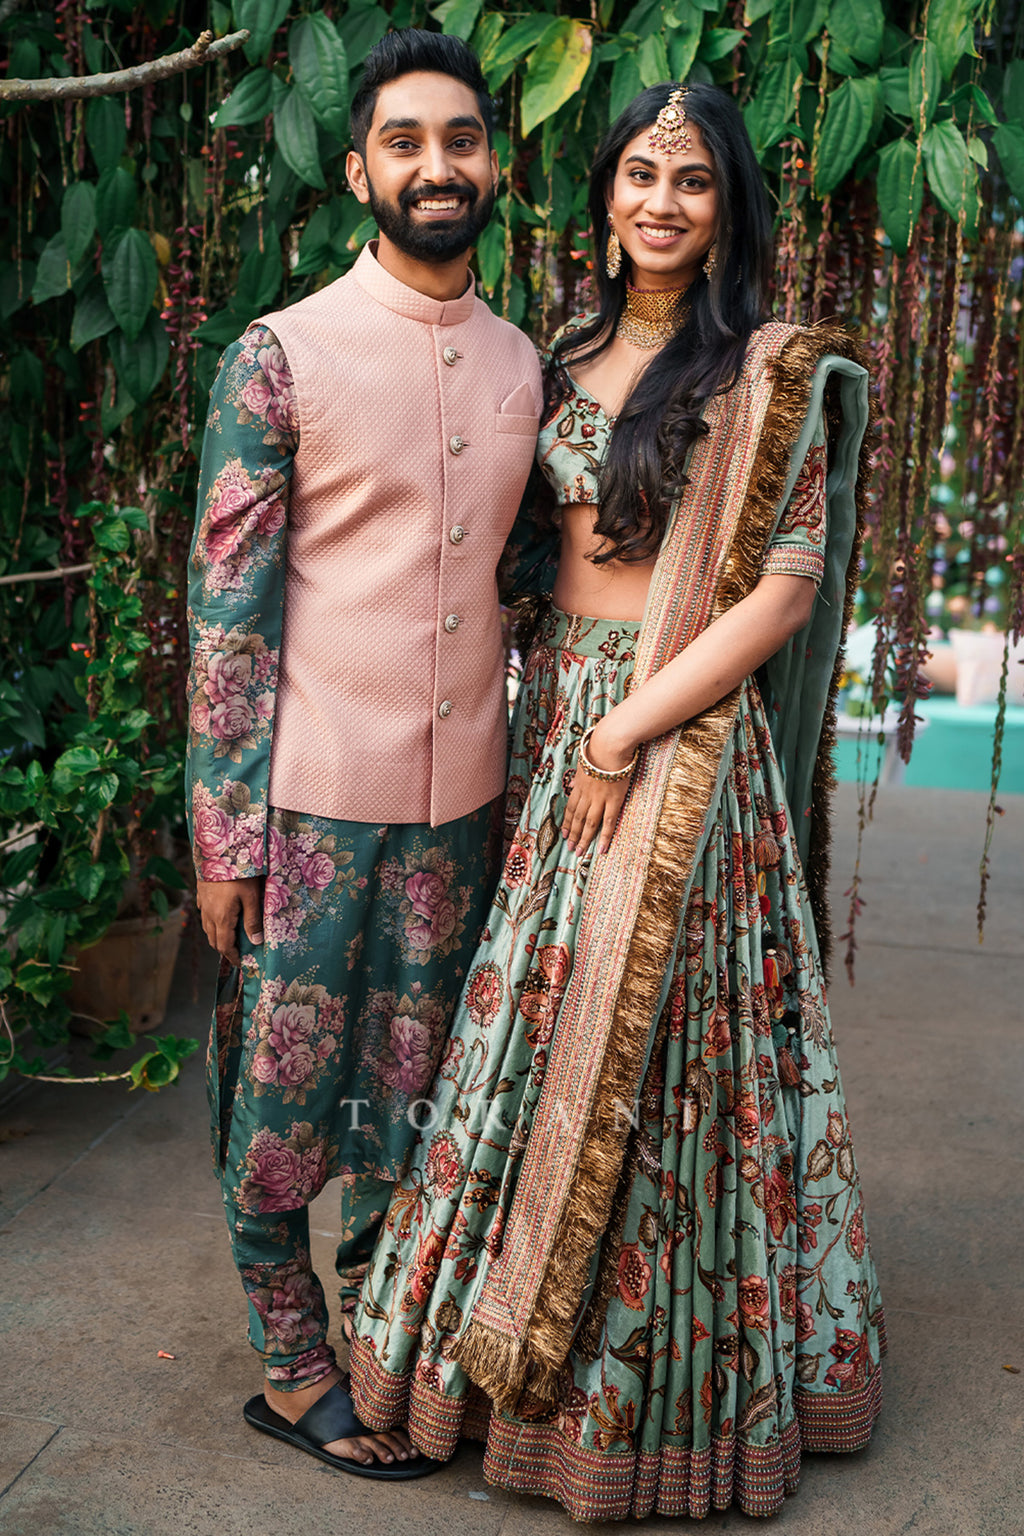 Are you Bride or Groom's brother? Top Wedding wear trends of 2020 | by  Sarmistha Choudhary | Medium